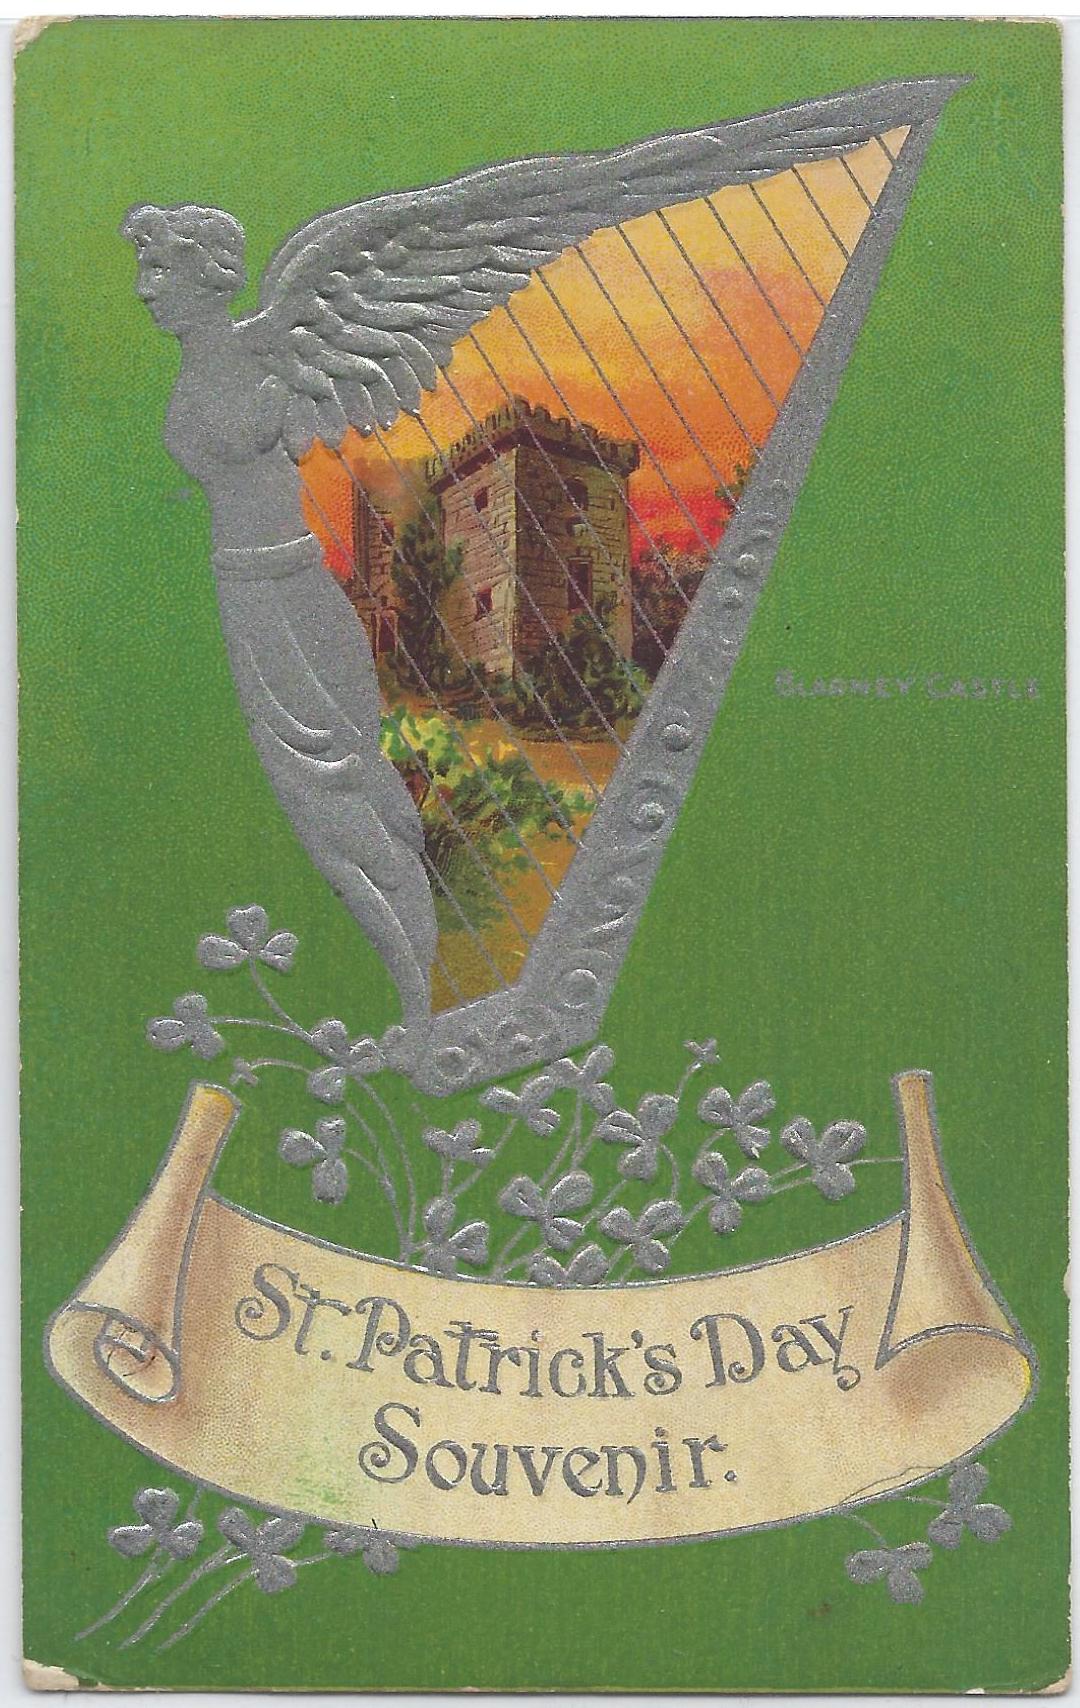 St Patrick's Day Postcard Silver Embossed Card Blarney Stone Castle in Silver Woman Harp Series 355